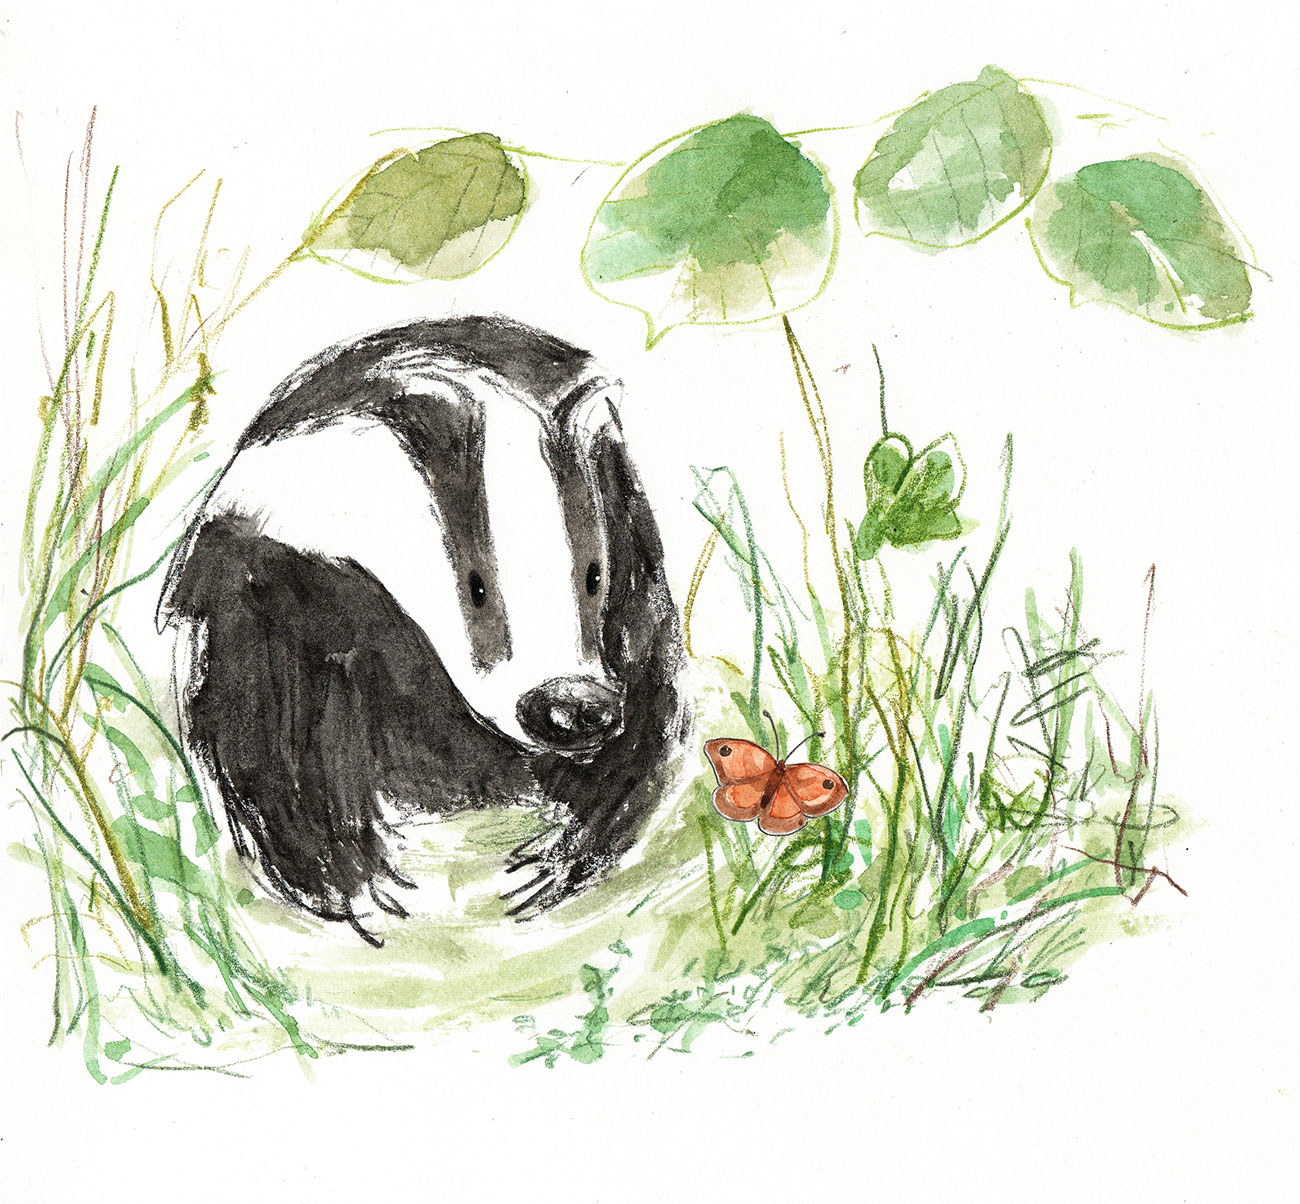 A badger on grass and leaves sees a butterfly